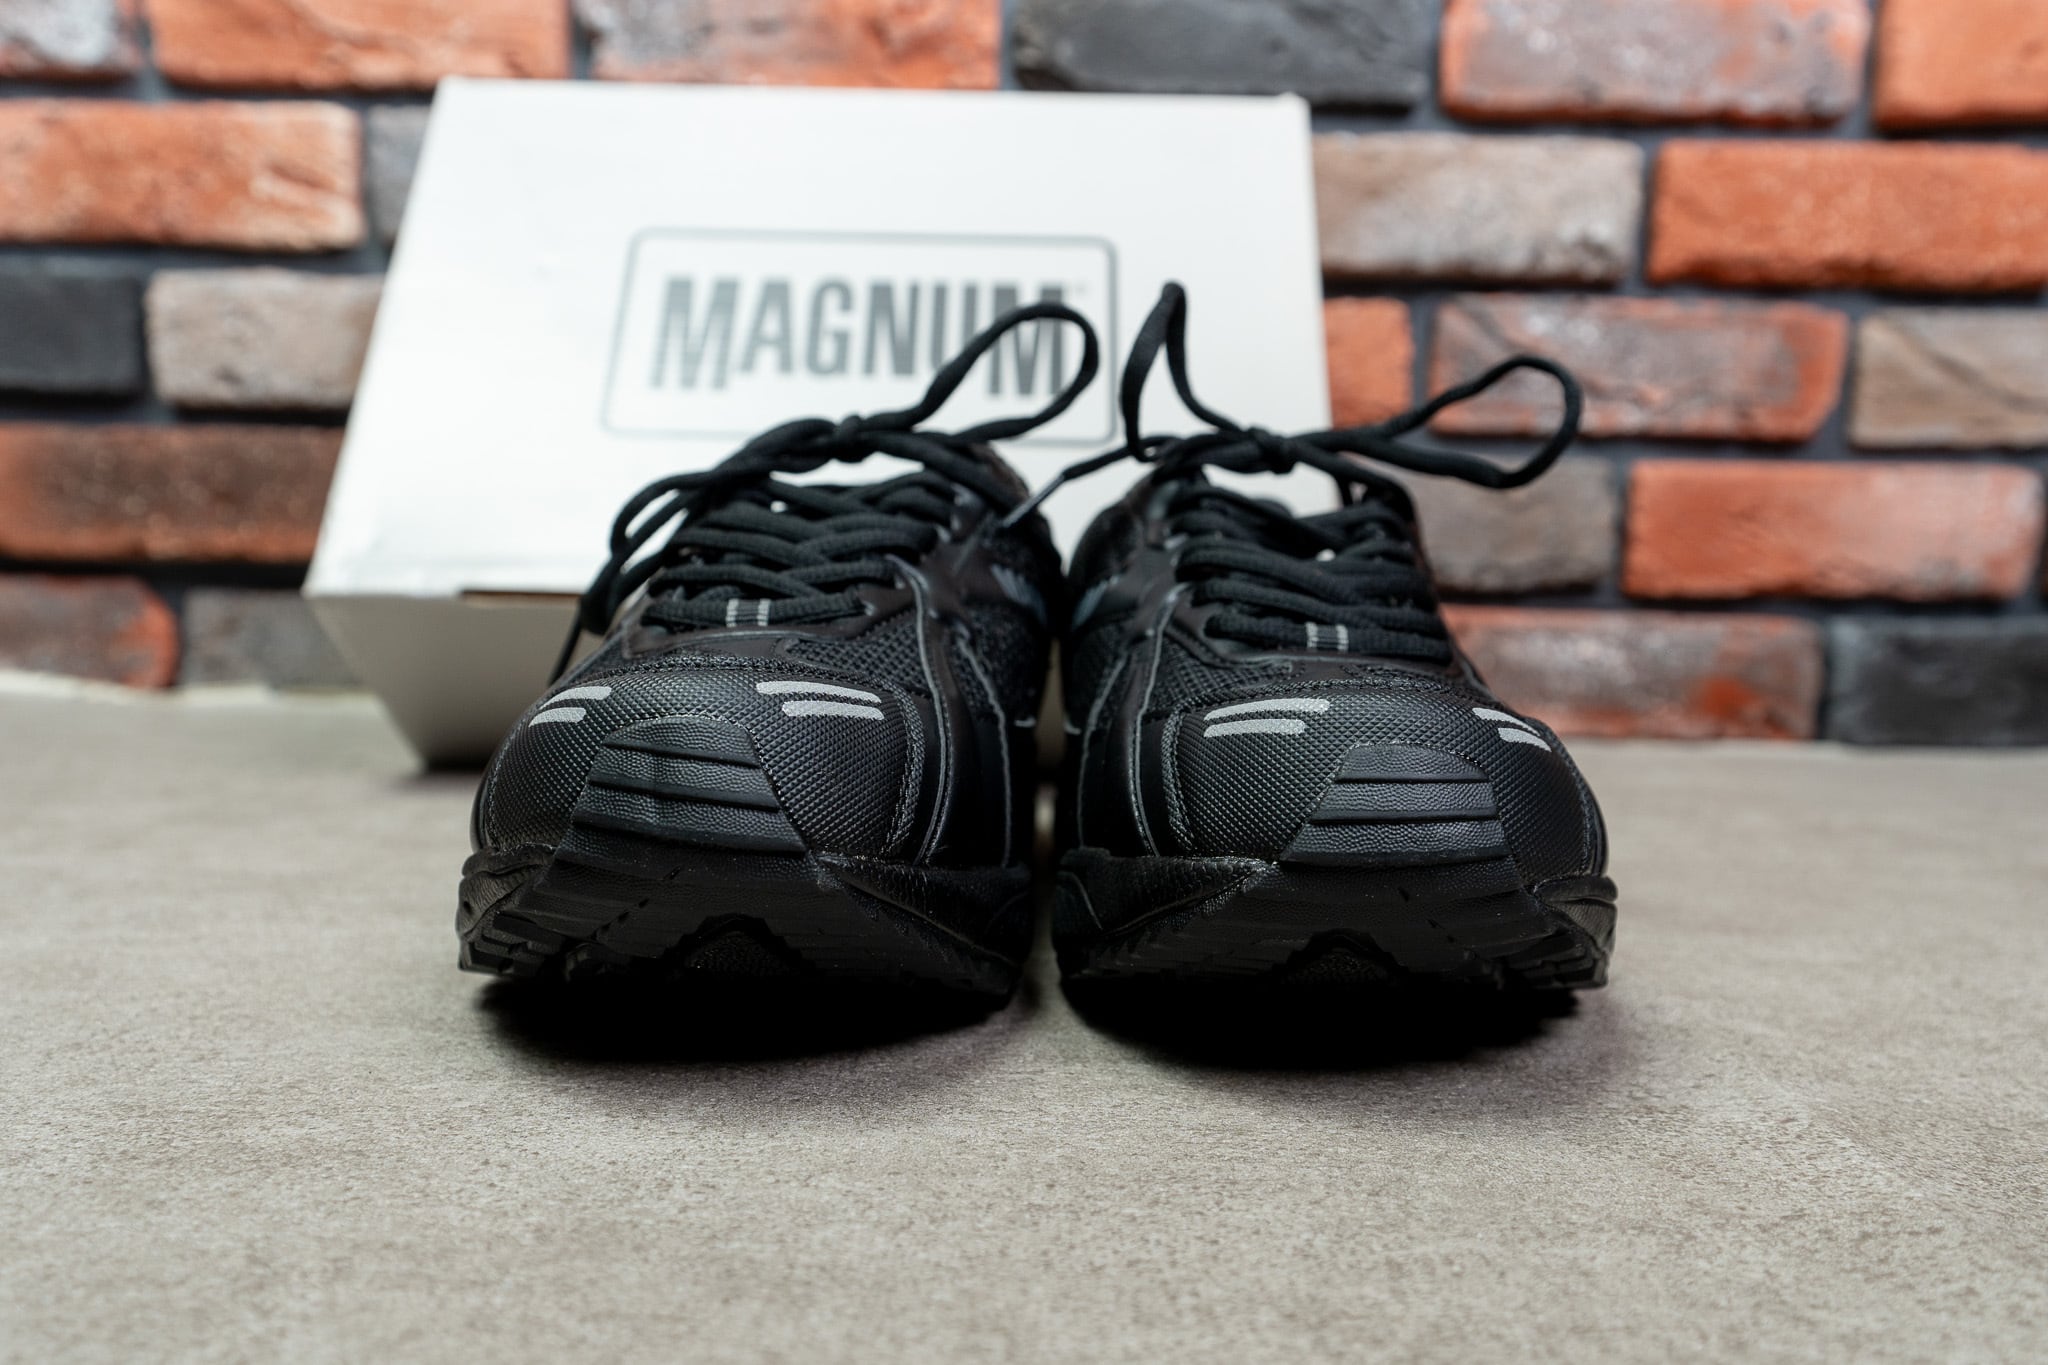 DEADSTOCK】British Army Training Shoes Magnum 実物 イギリス軍 